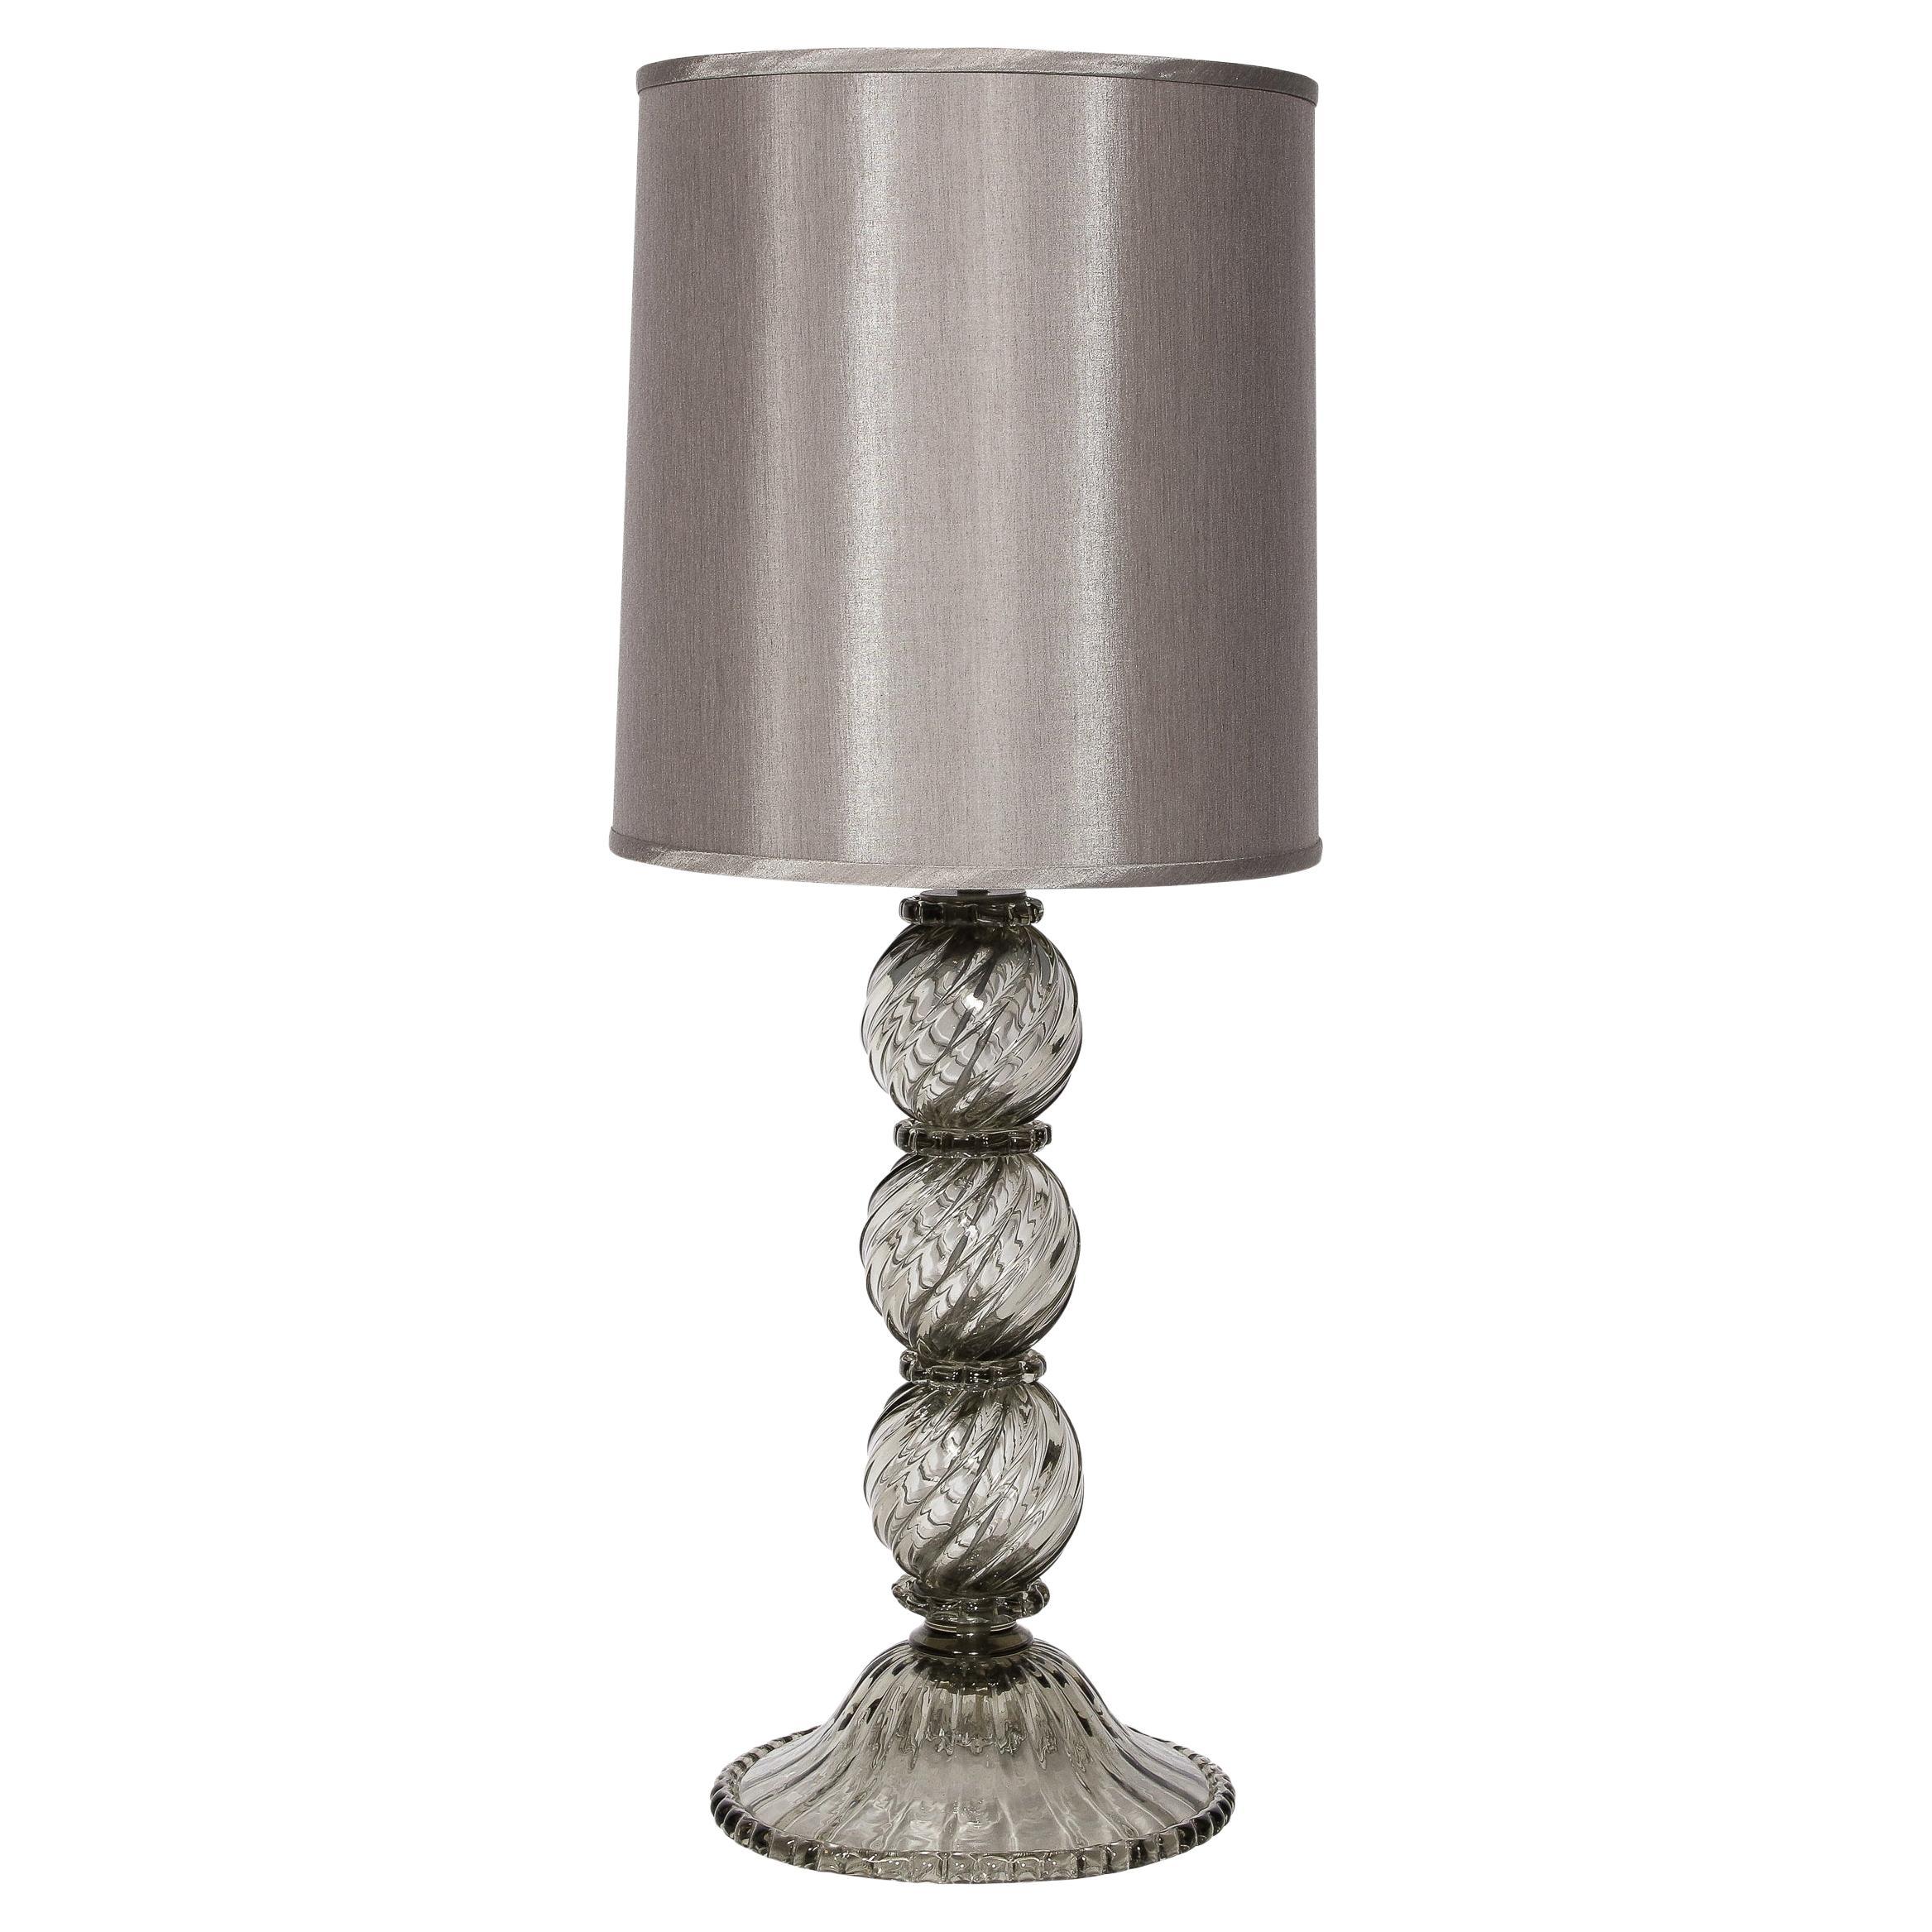 Modernist Hand Blown Murano Smoked Glass Table Lamp with Scalloped Detailing